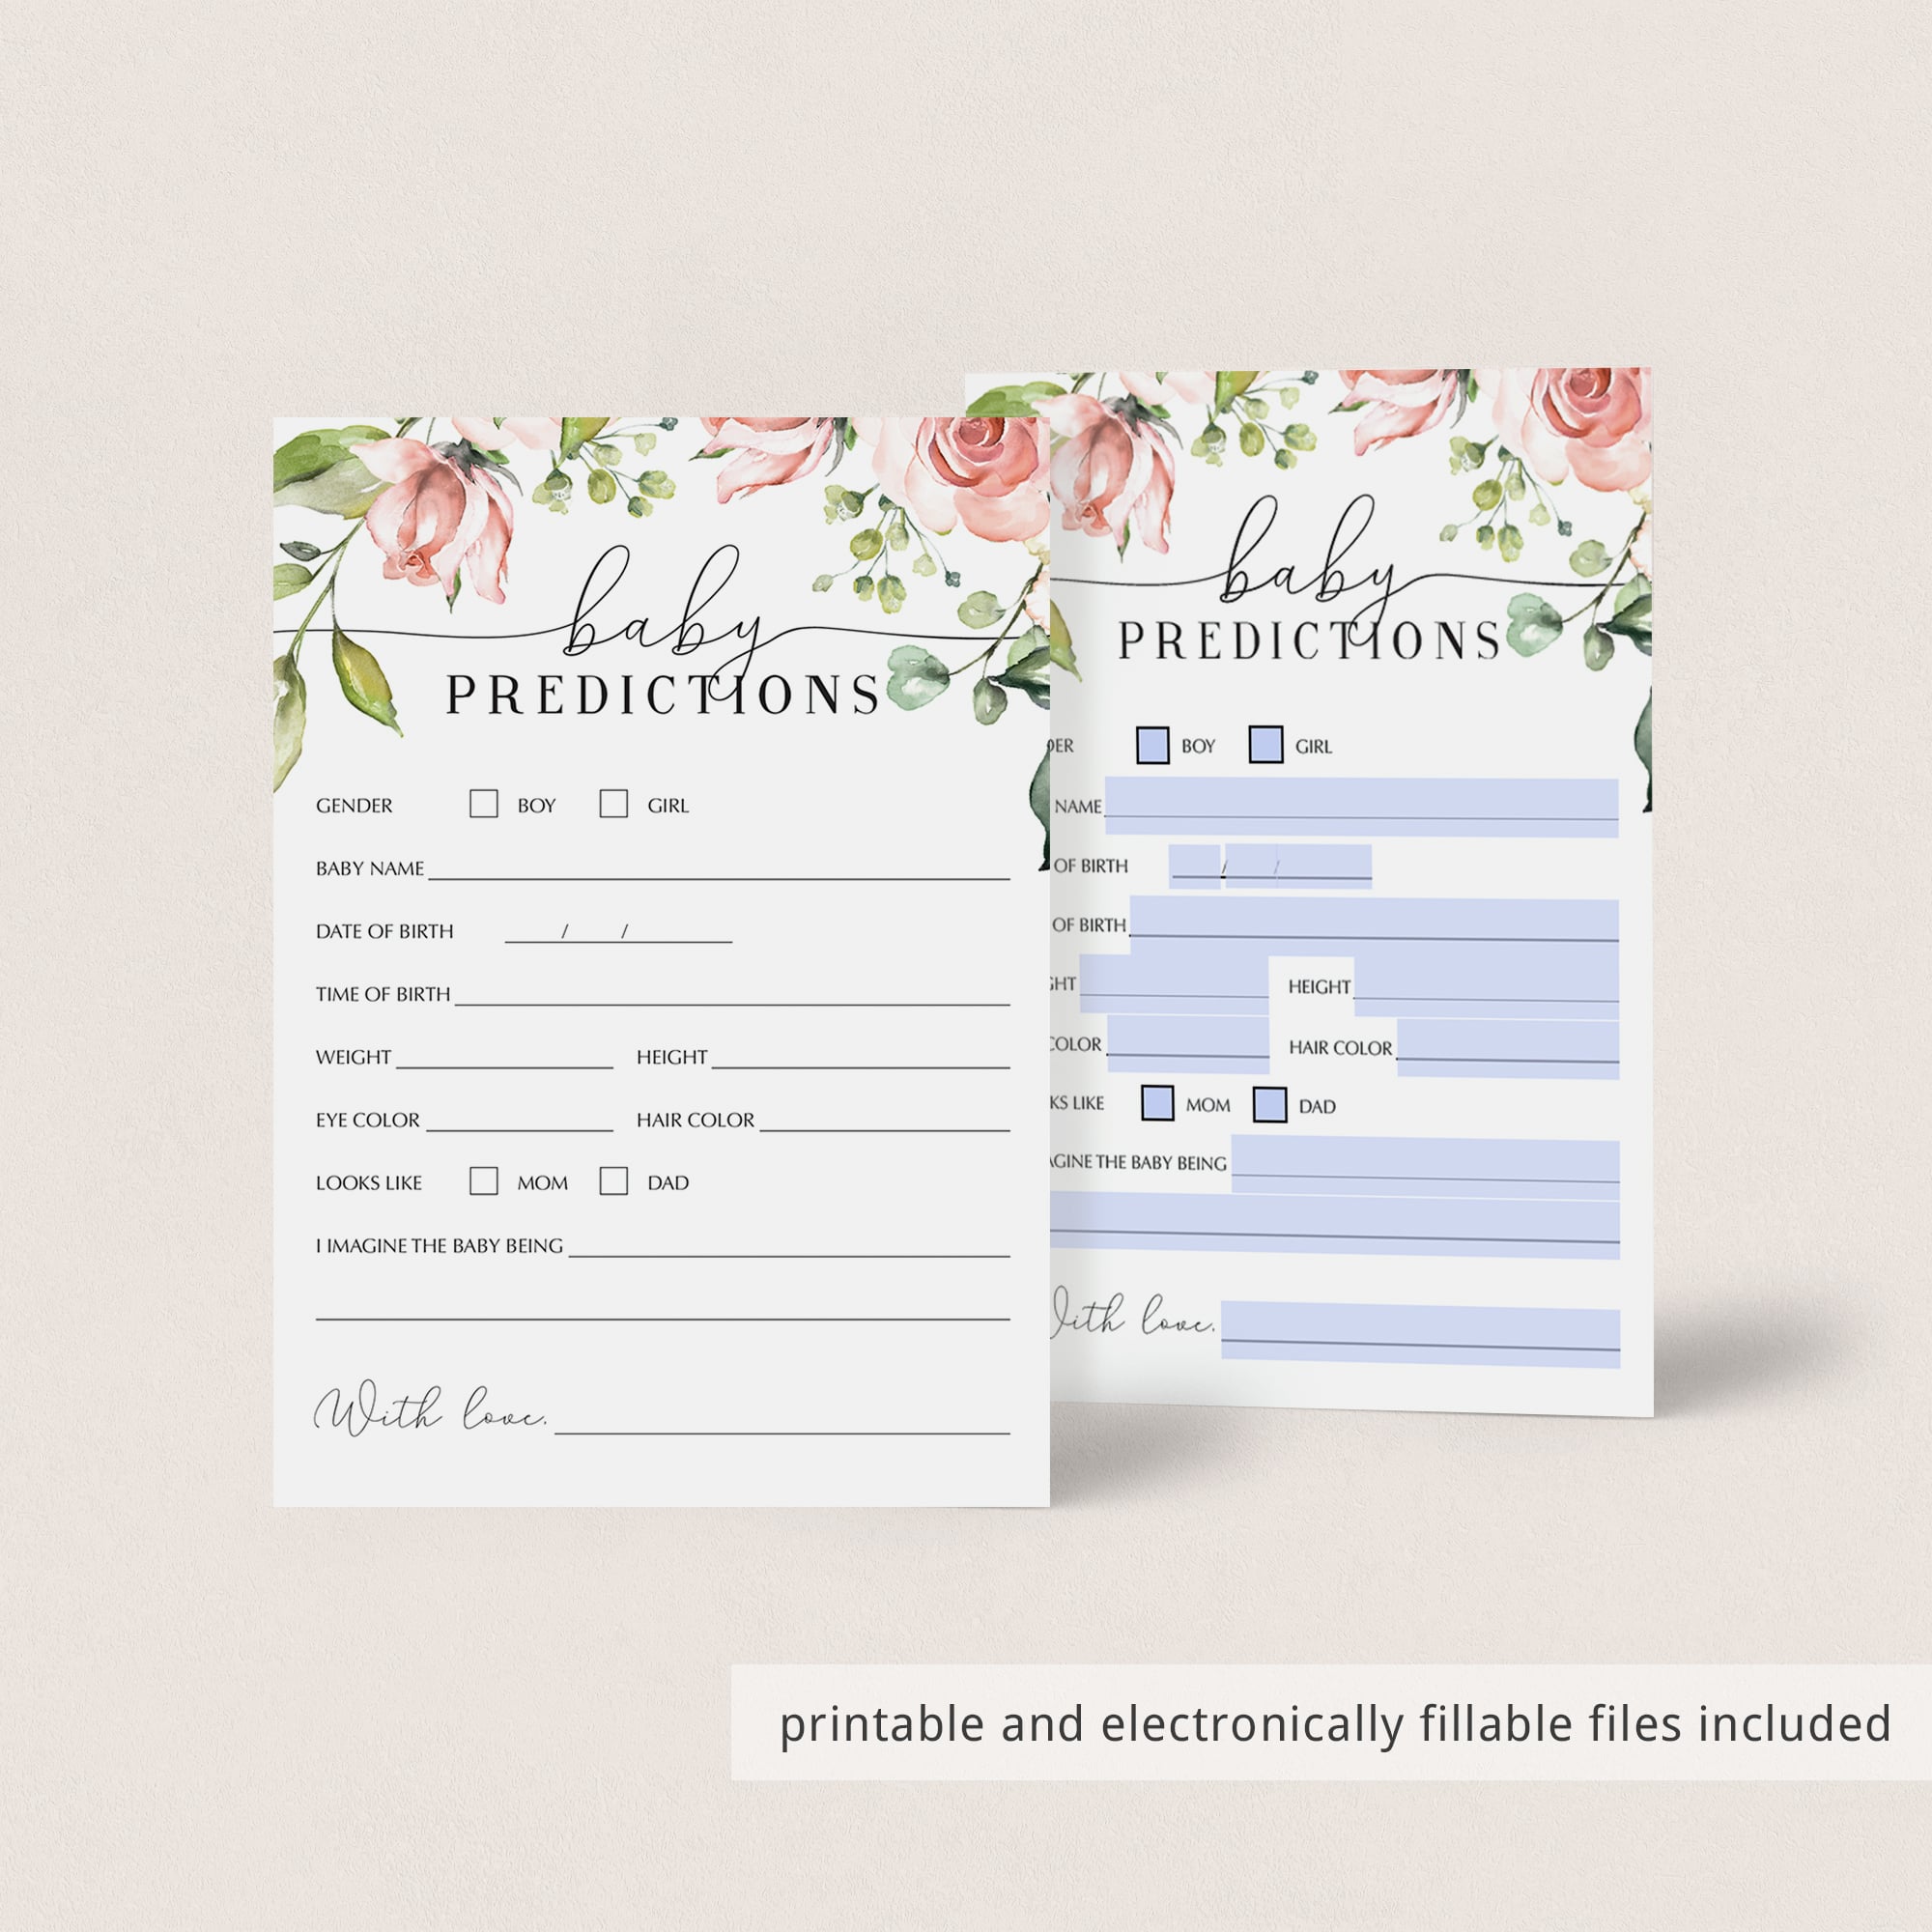 Virtual baby shower prediction cards by LittleSizzle